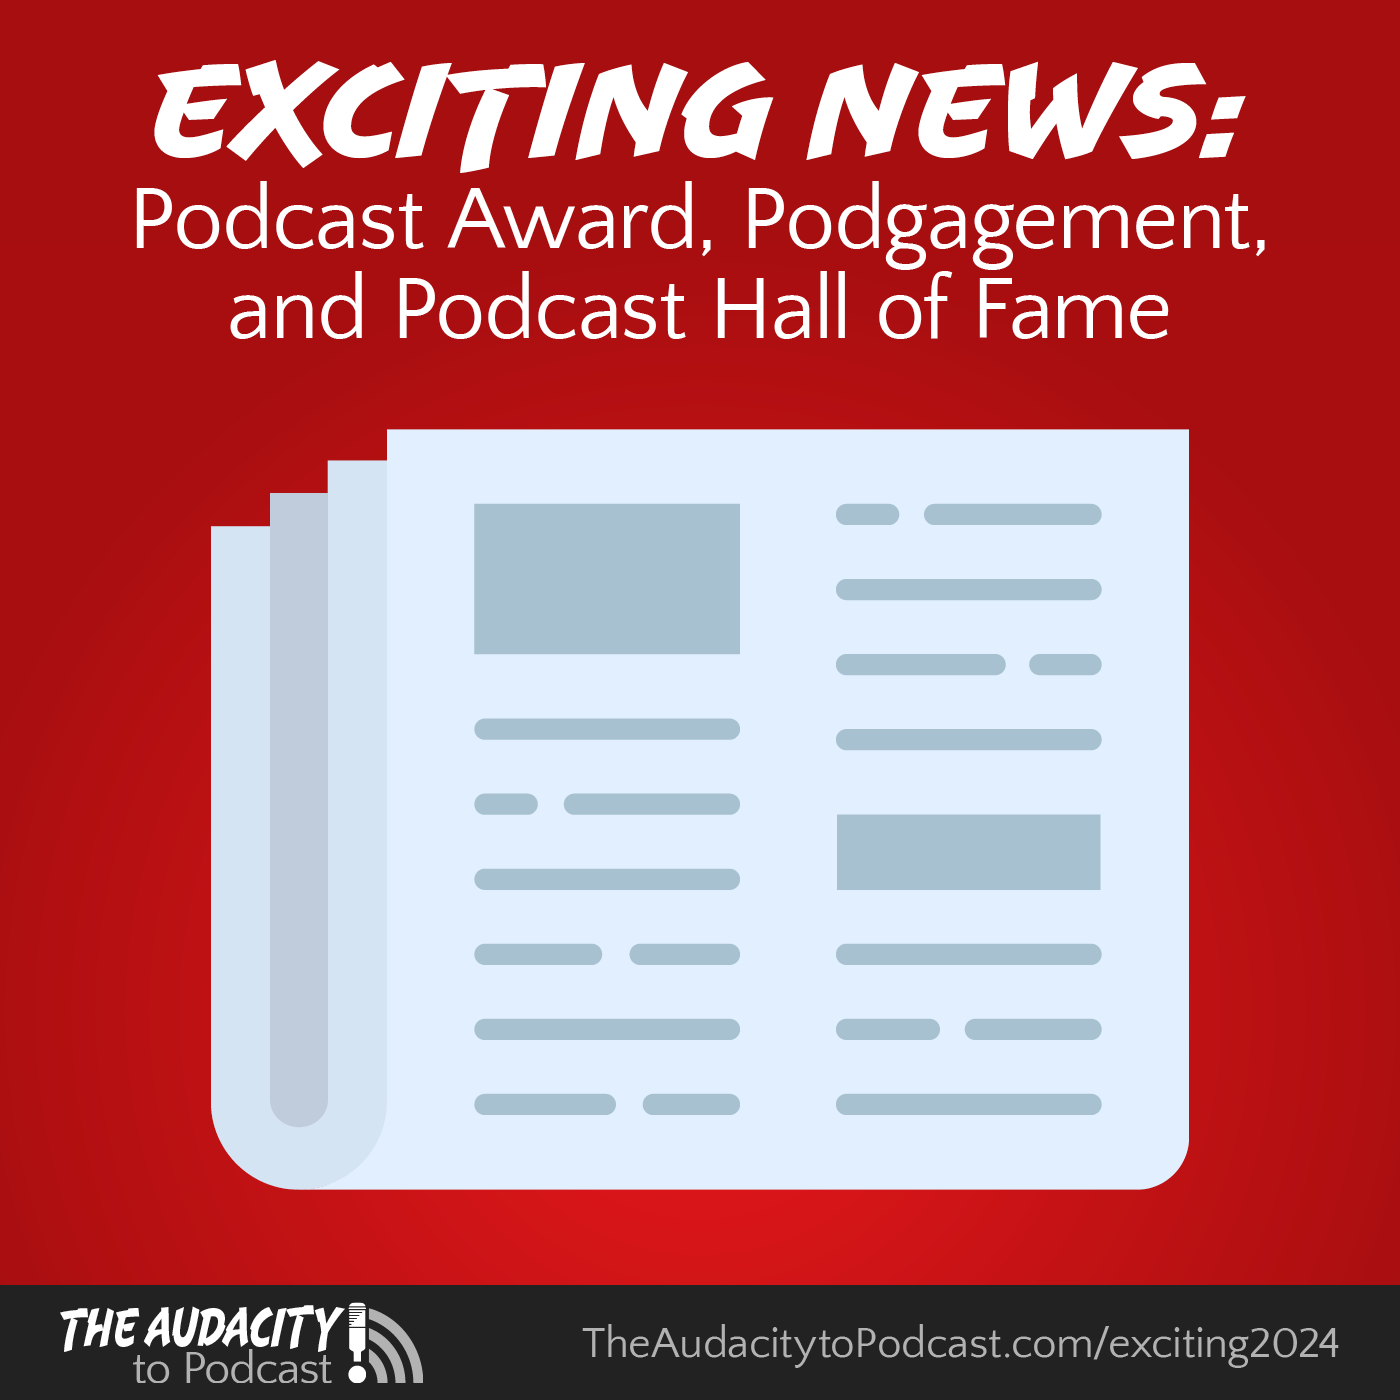 Exciting News: Podcast Award, Podgagement, and Podcast Hall of Fame